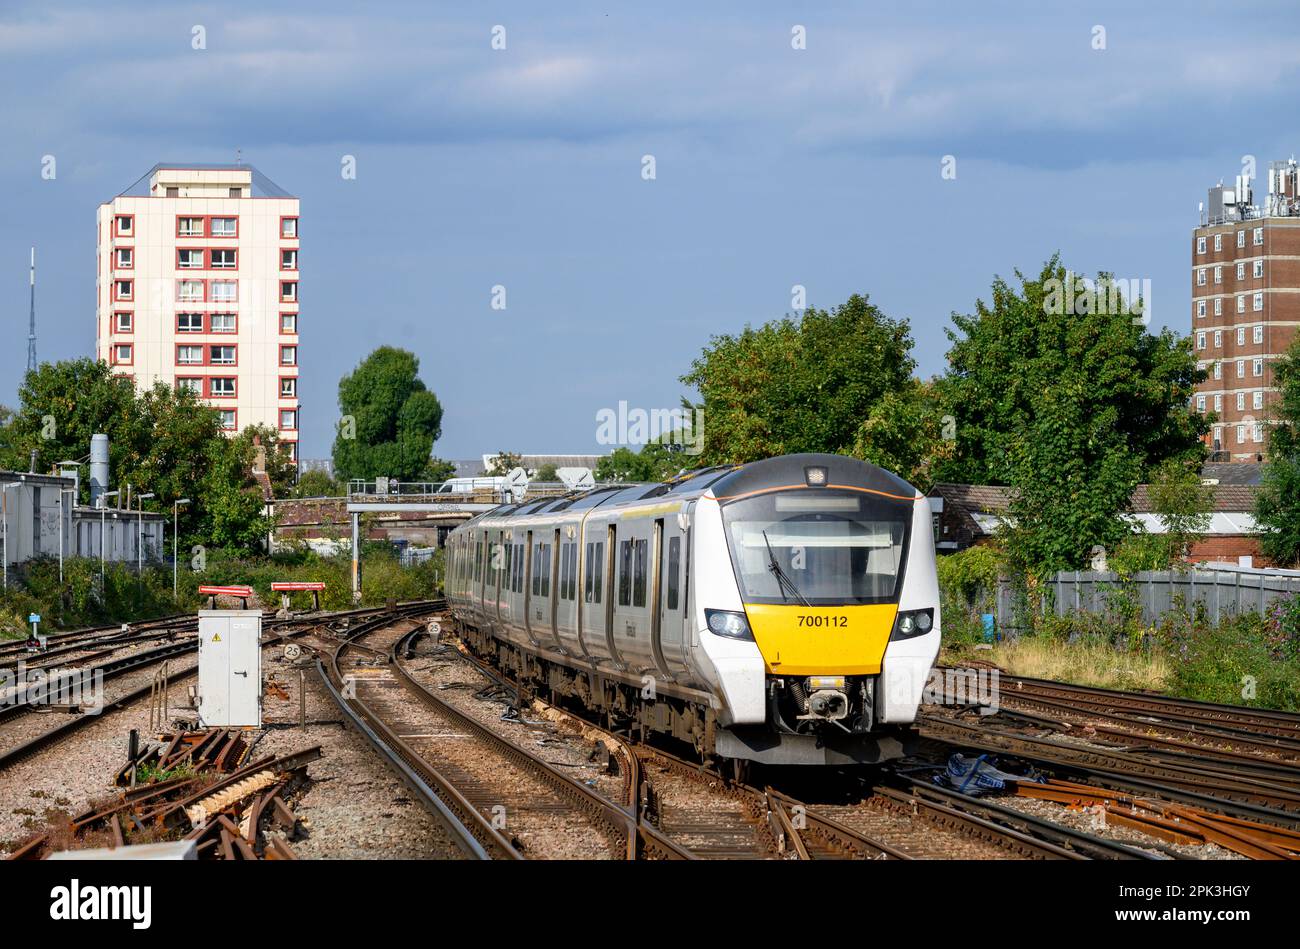 Class 700 passenger train in Thameslink livery travelling along track, London, England. Stock Photo